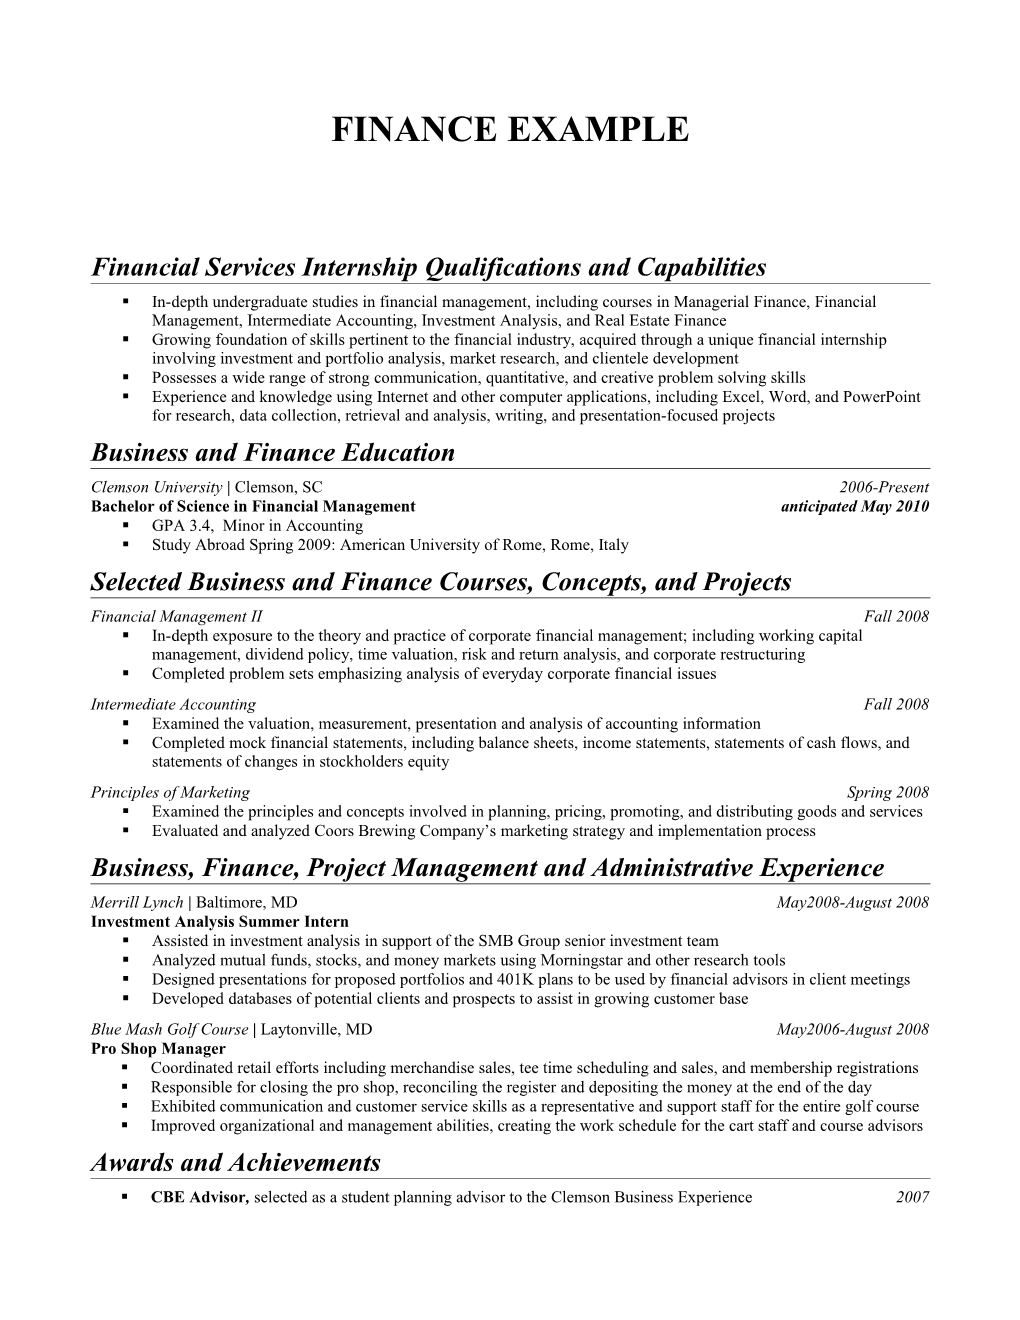 Financial Services Internship Qualifications and Capabilities